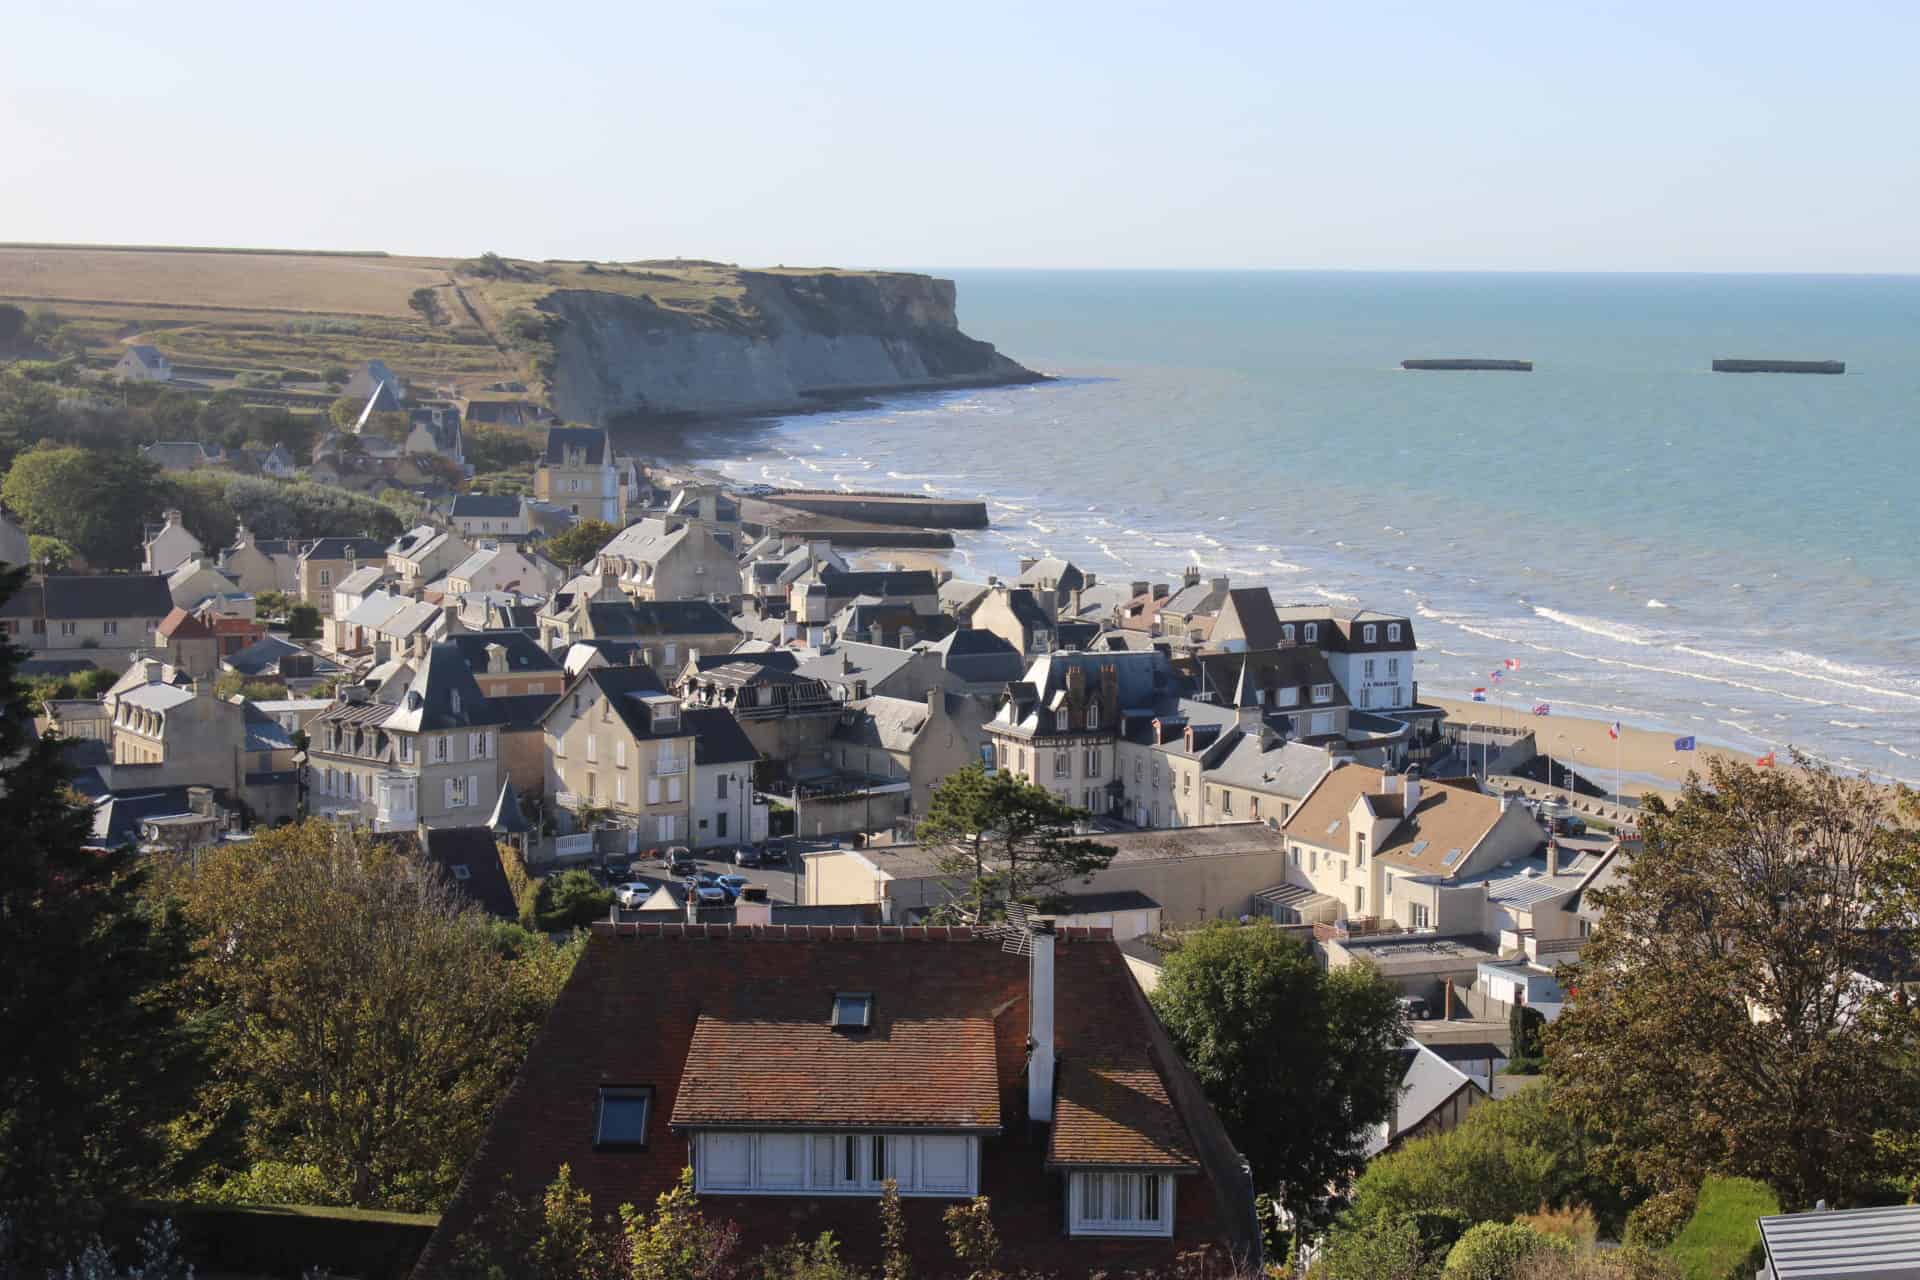 Looking out over Arromanches